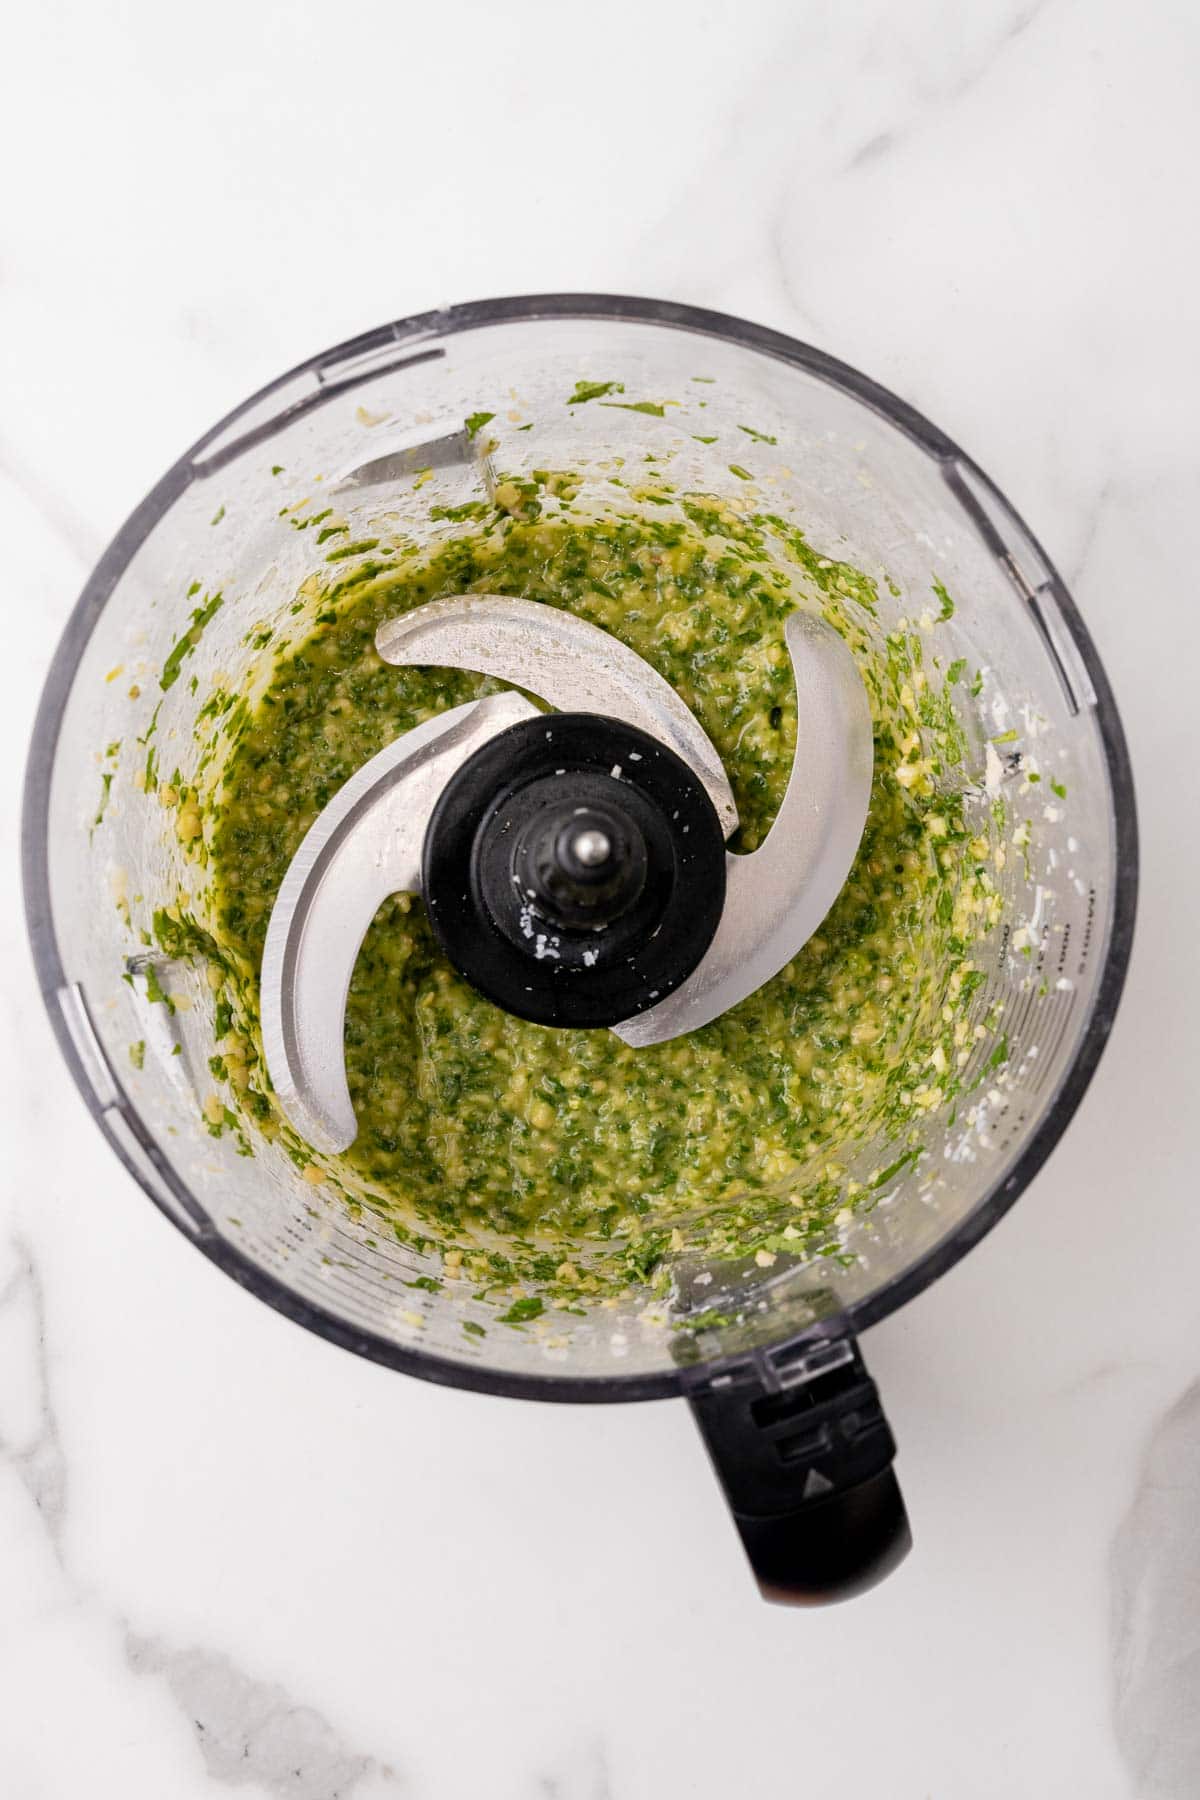 Finished pesto in the food processor